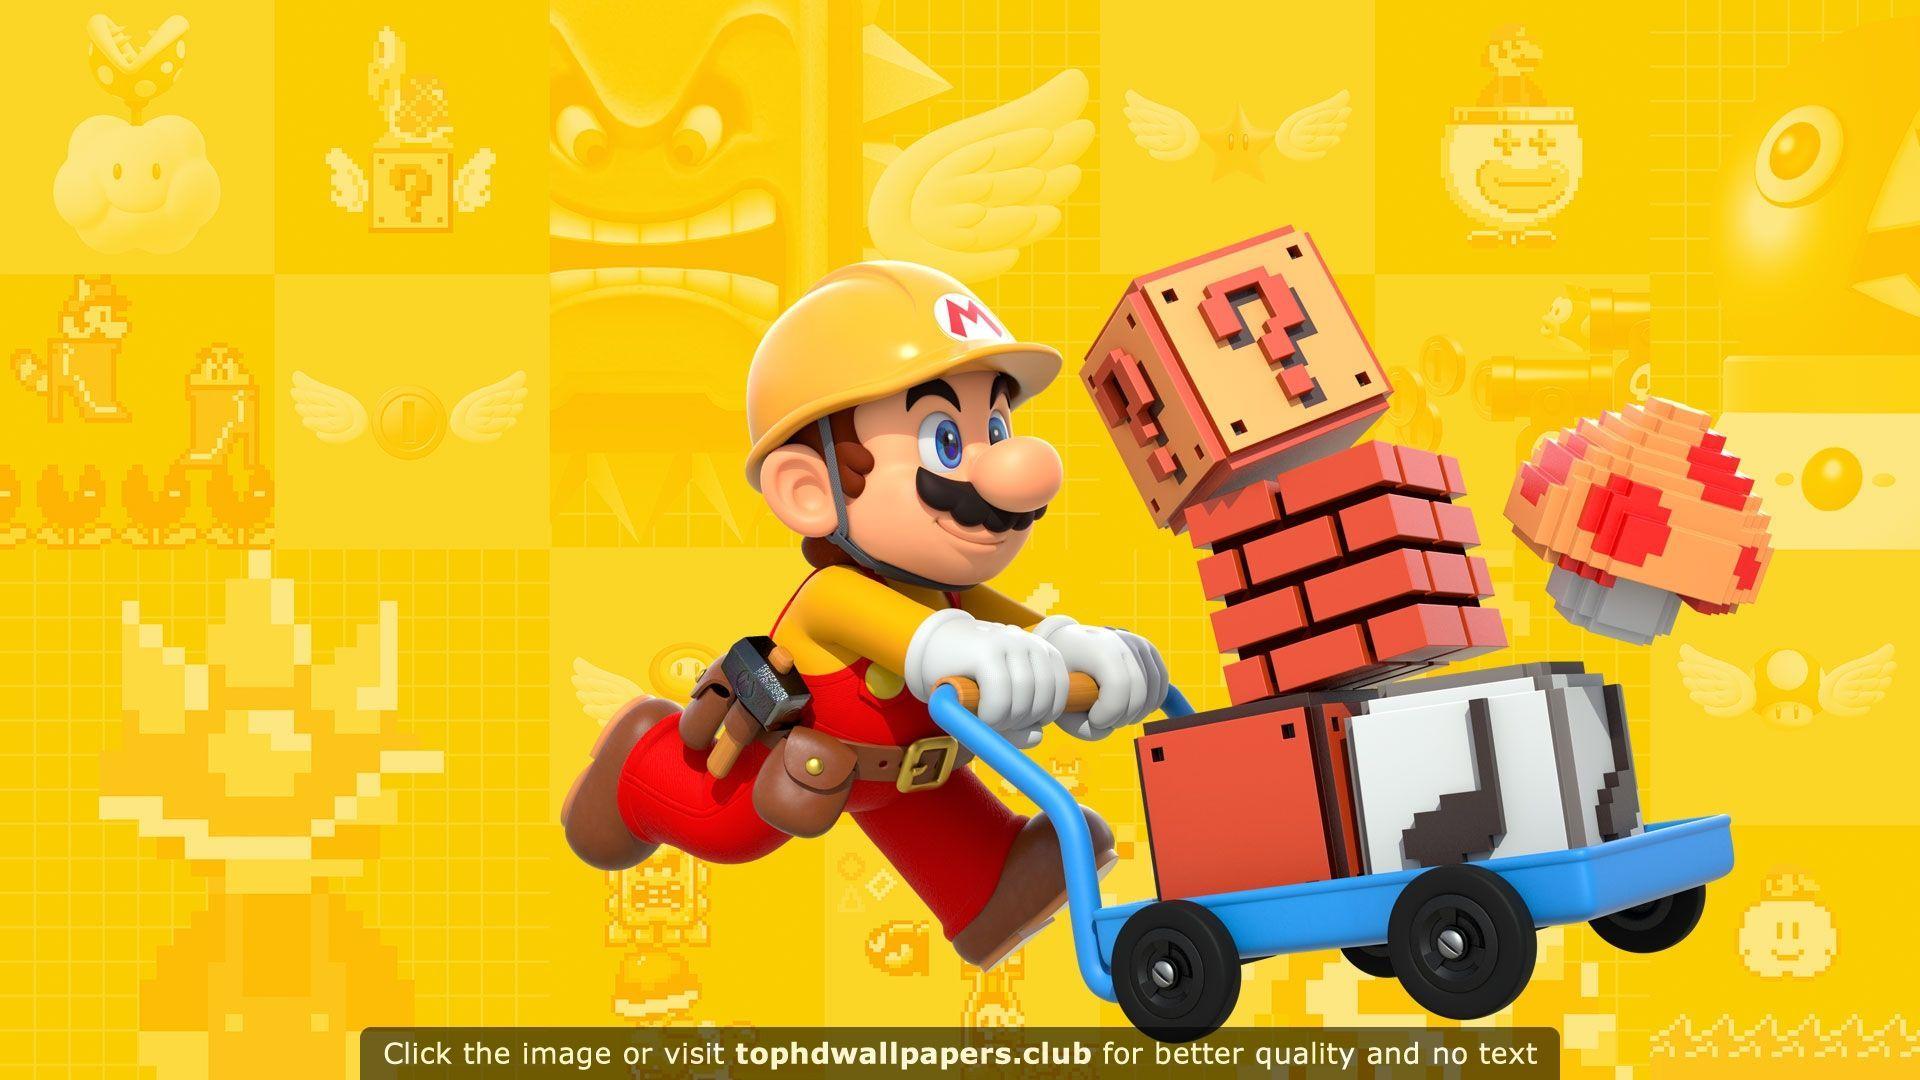 Super Mario Maker 4K or HD wallpaper for your PC, Mac or Mobile